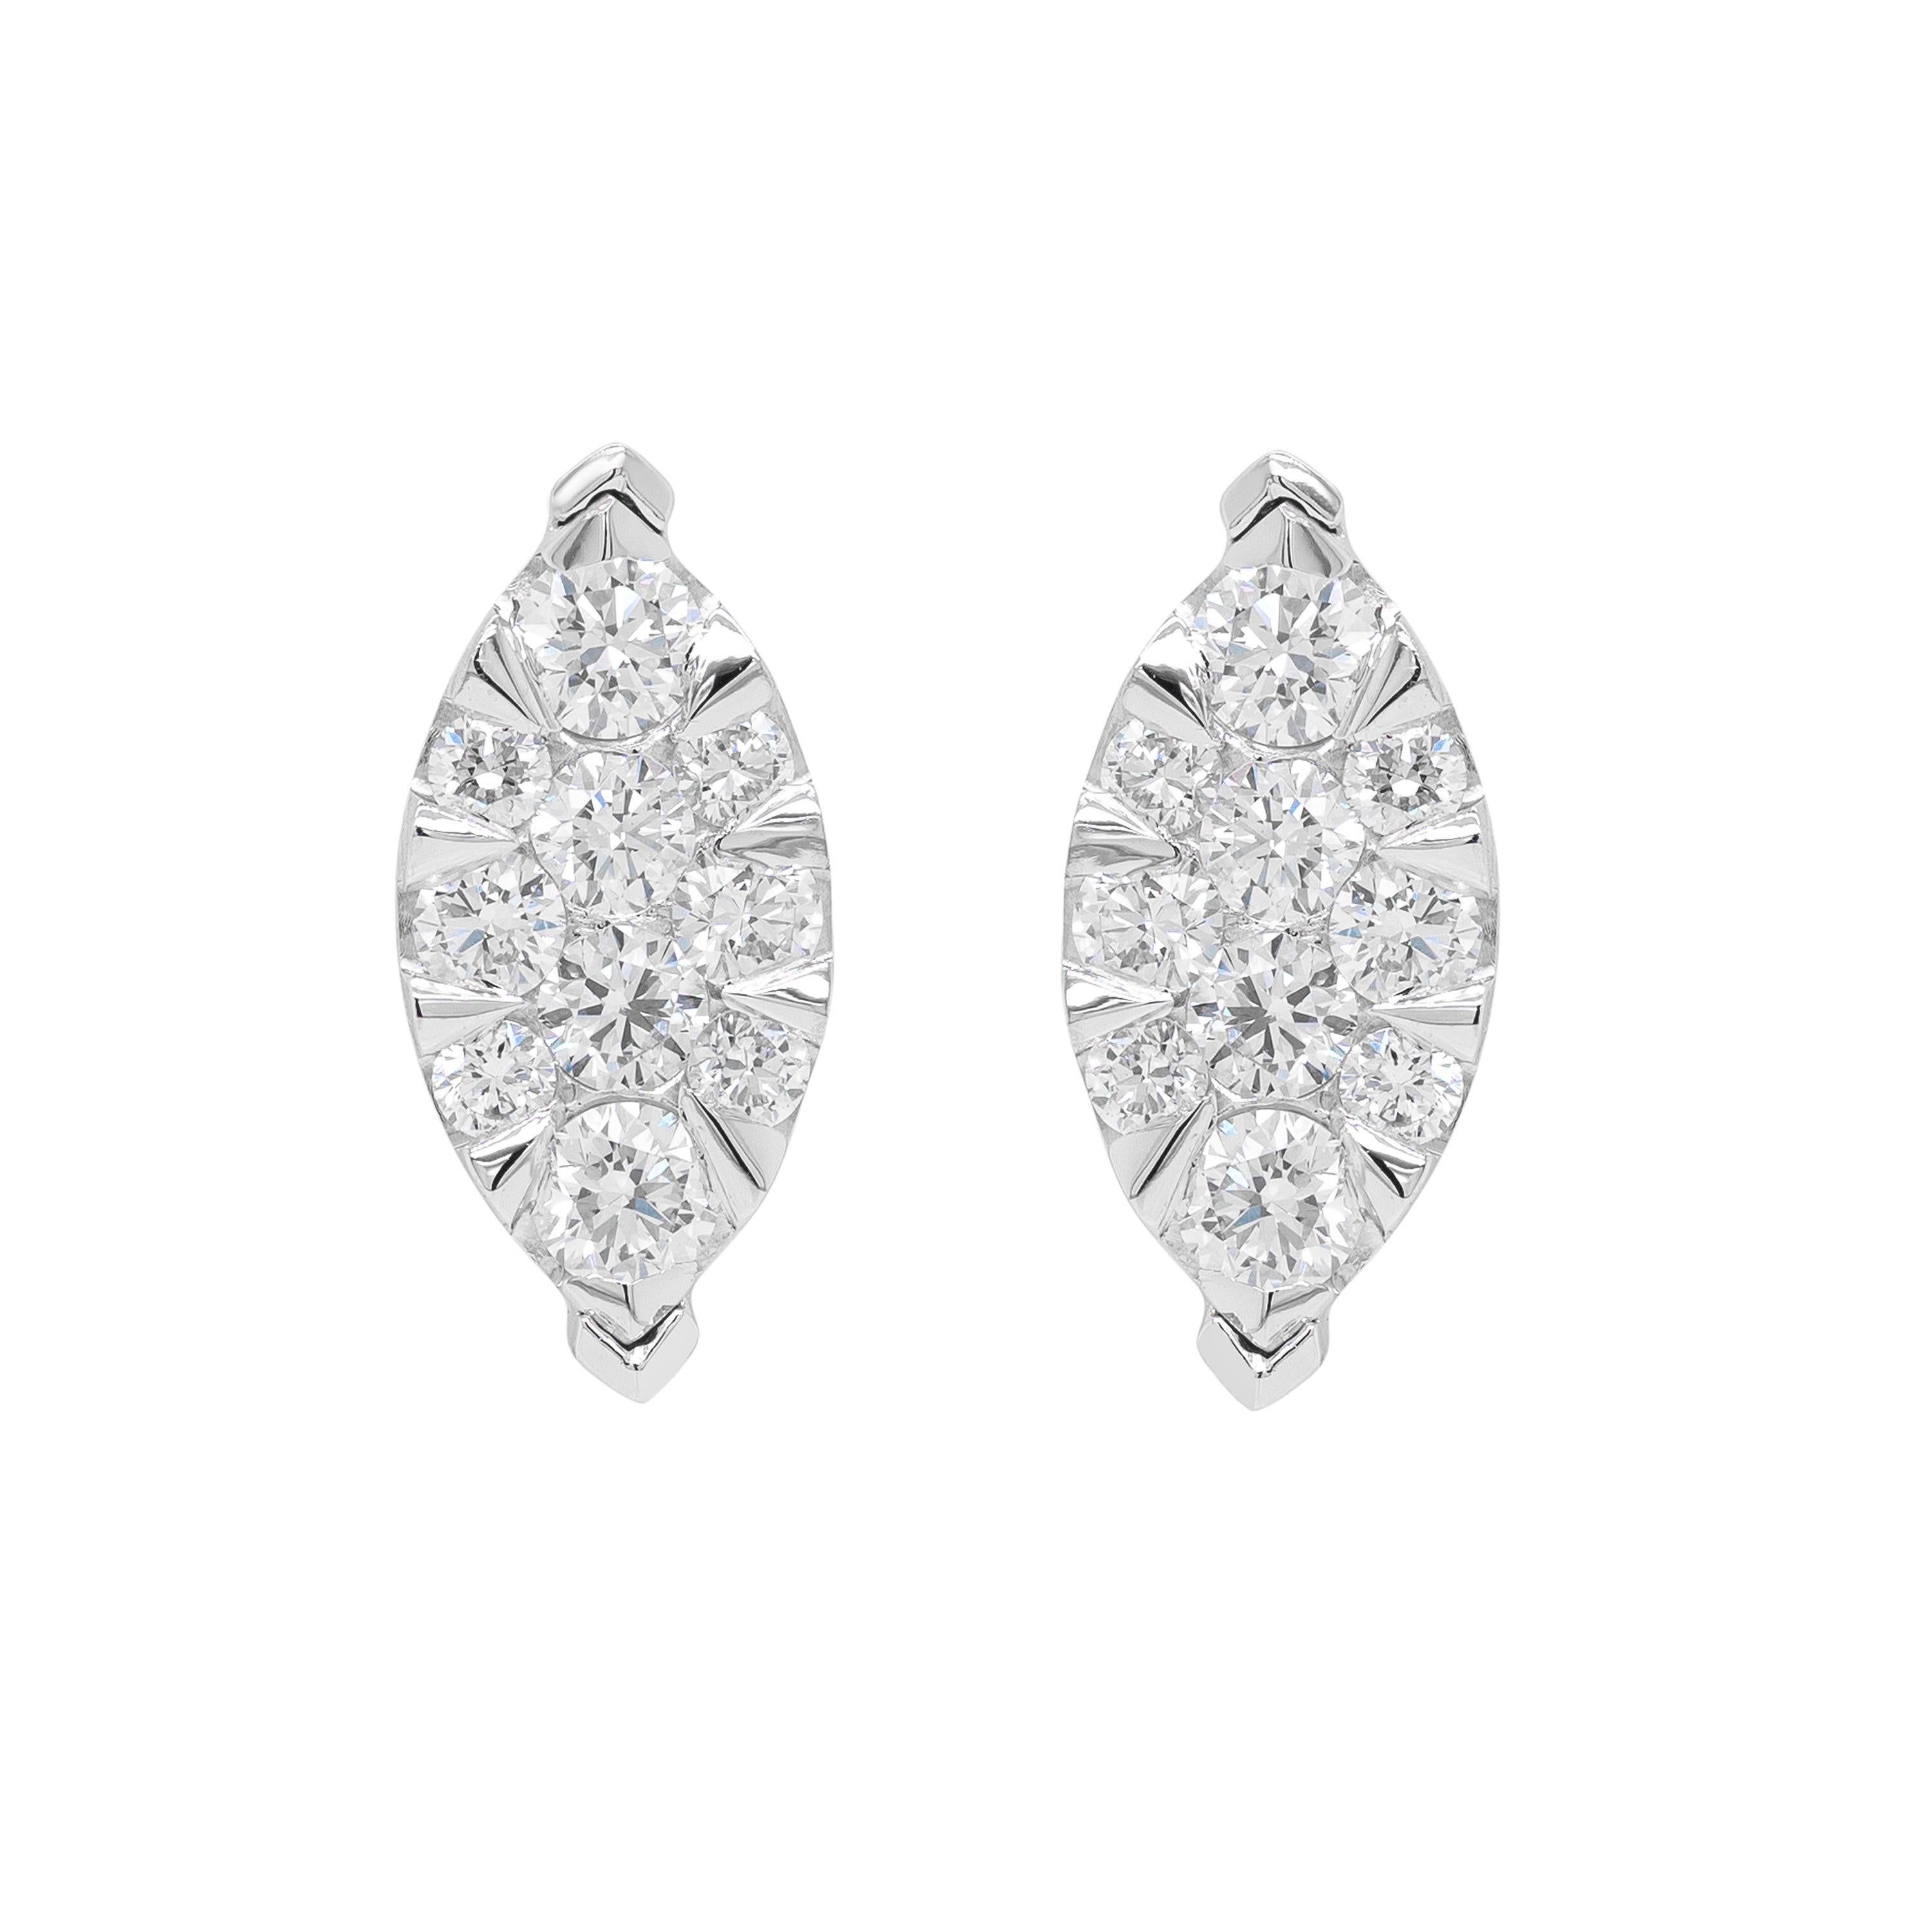 Exquisite and delicate, this beautiful 18 carat white gold set features a marquise shaped diamond pendant and matching earrings. The pendant is beautifully inlaid with 10 fine quality round brilliant cut diamonds, weighing 0.46ct in total. The